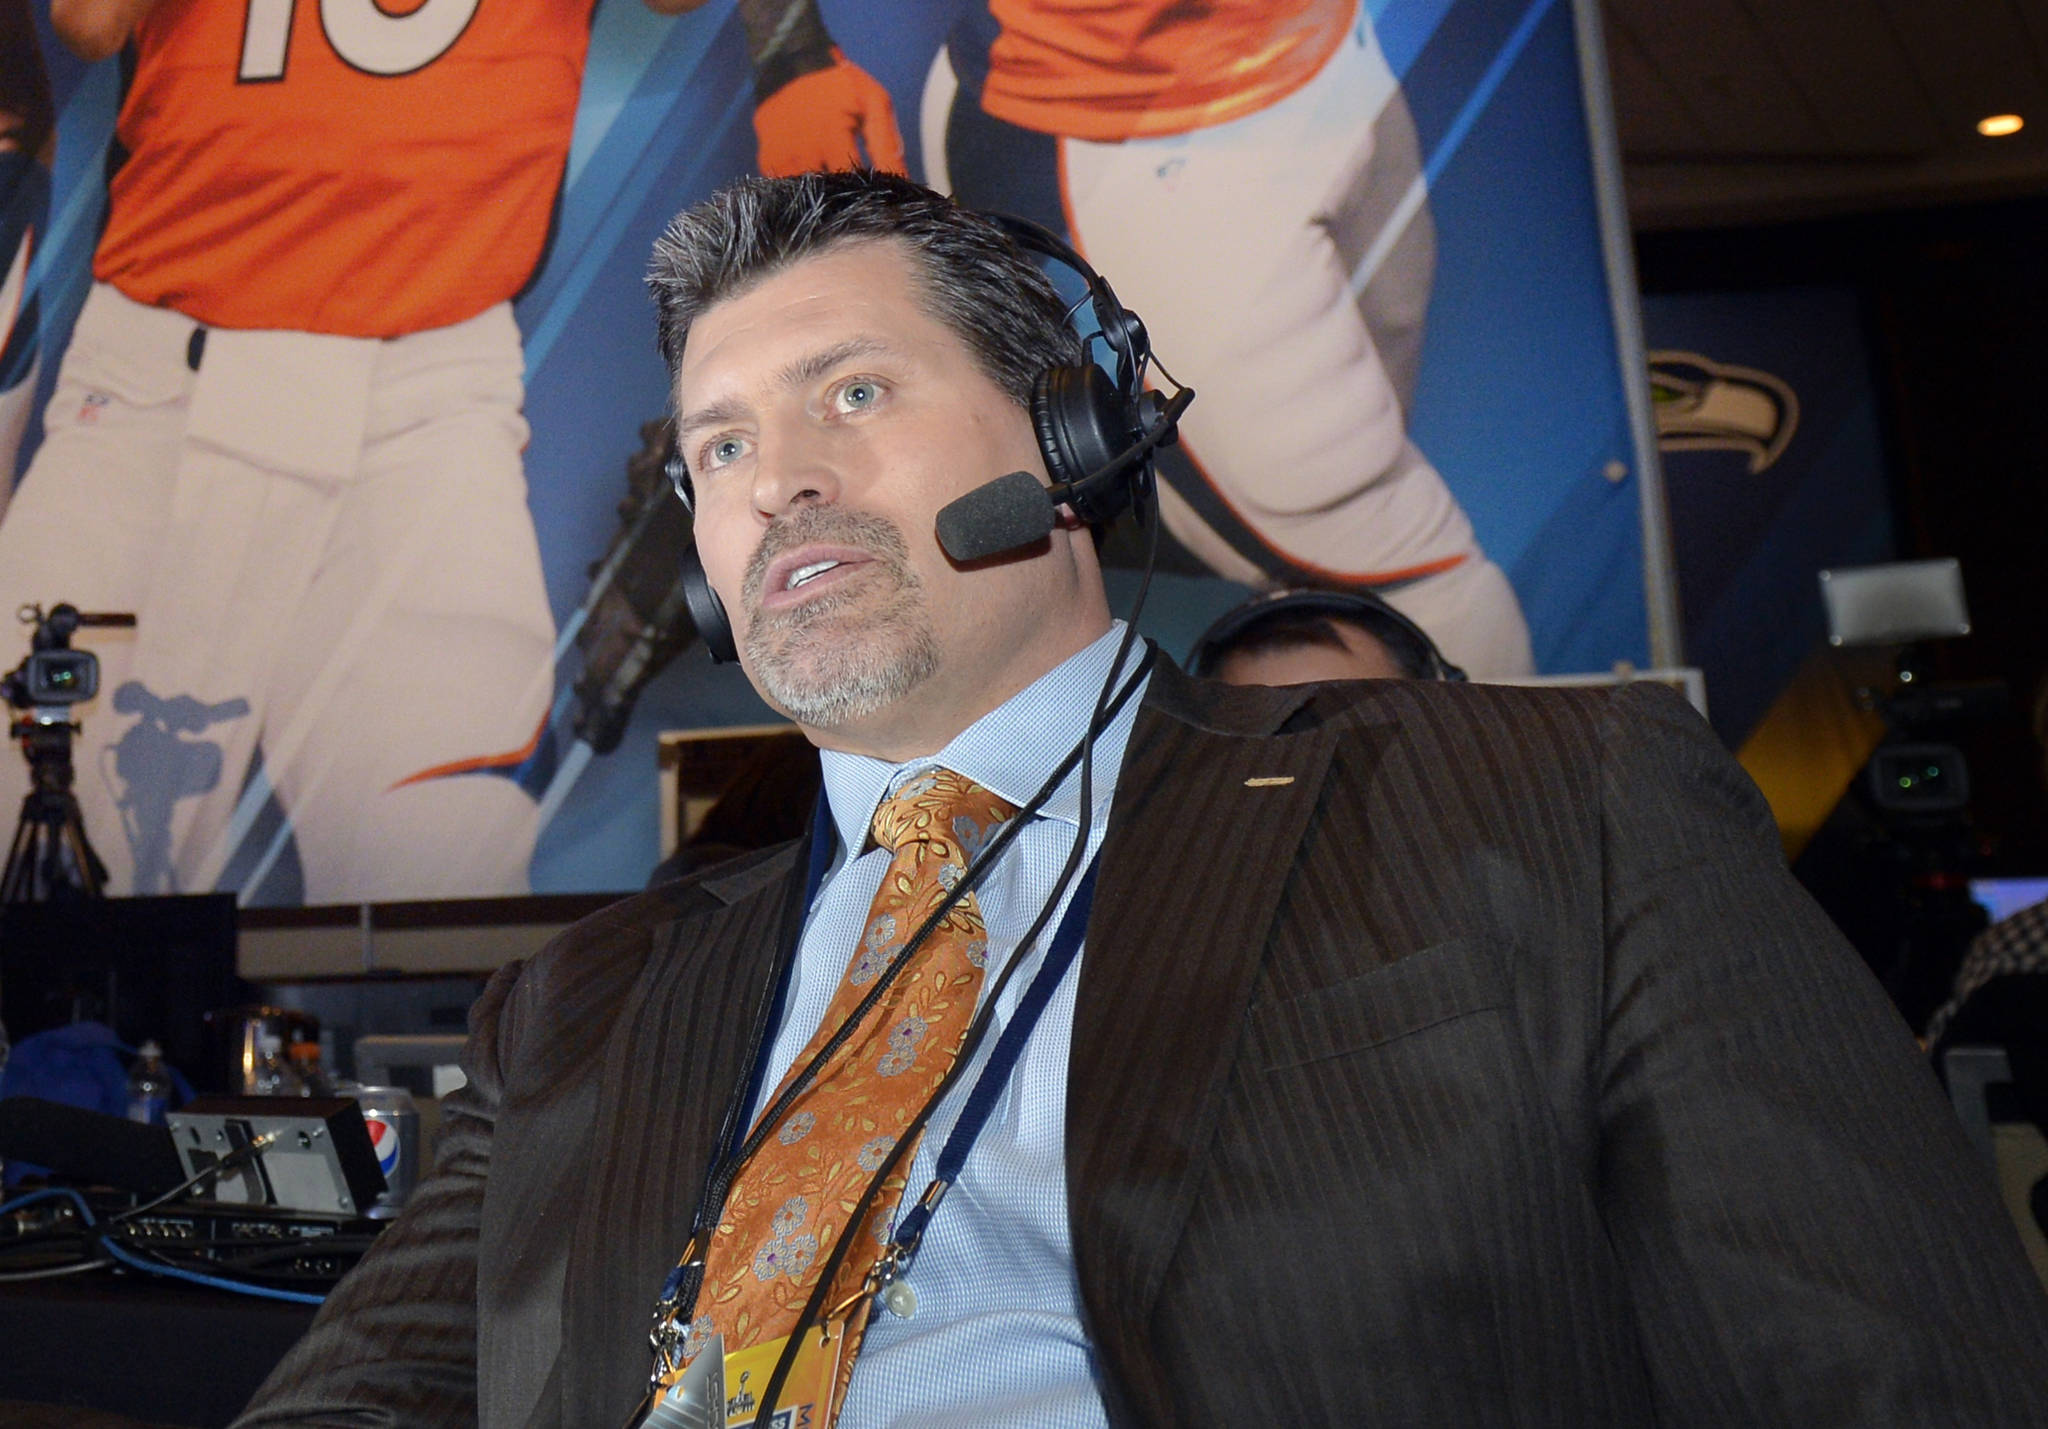 FILE - This Jan. 29, 2014 file photo shows former Denver Broncos offensive lineman and ESPN analyst Mark Schlereth in New York.   Schlereth returned home to Alaska this week to encourage people to get the COVID-19 vaccine.  The Service High alumnus made a halftime appearance Friday, Aug. 20, 2021 at West High, where his alma mater squared off against the West Eagles.  (AP Photo / Jack Dempsey)